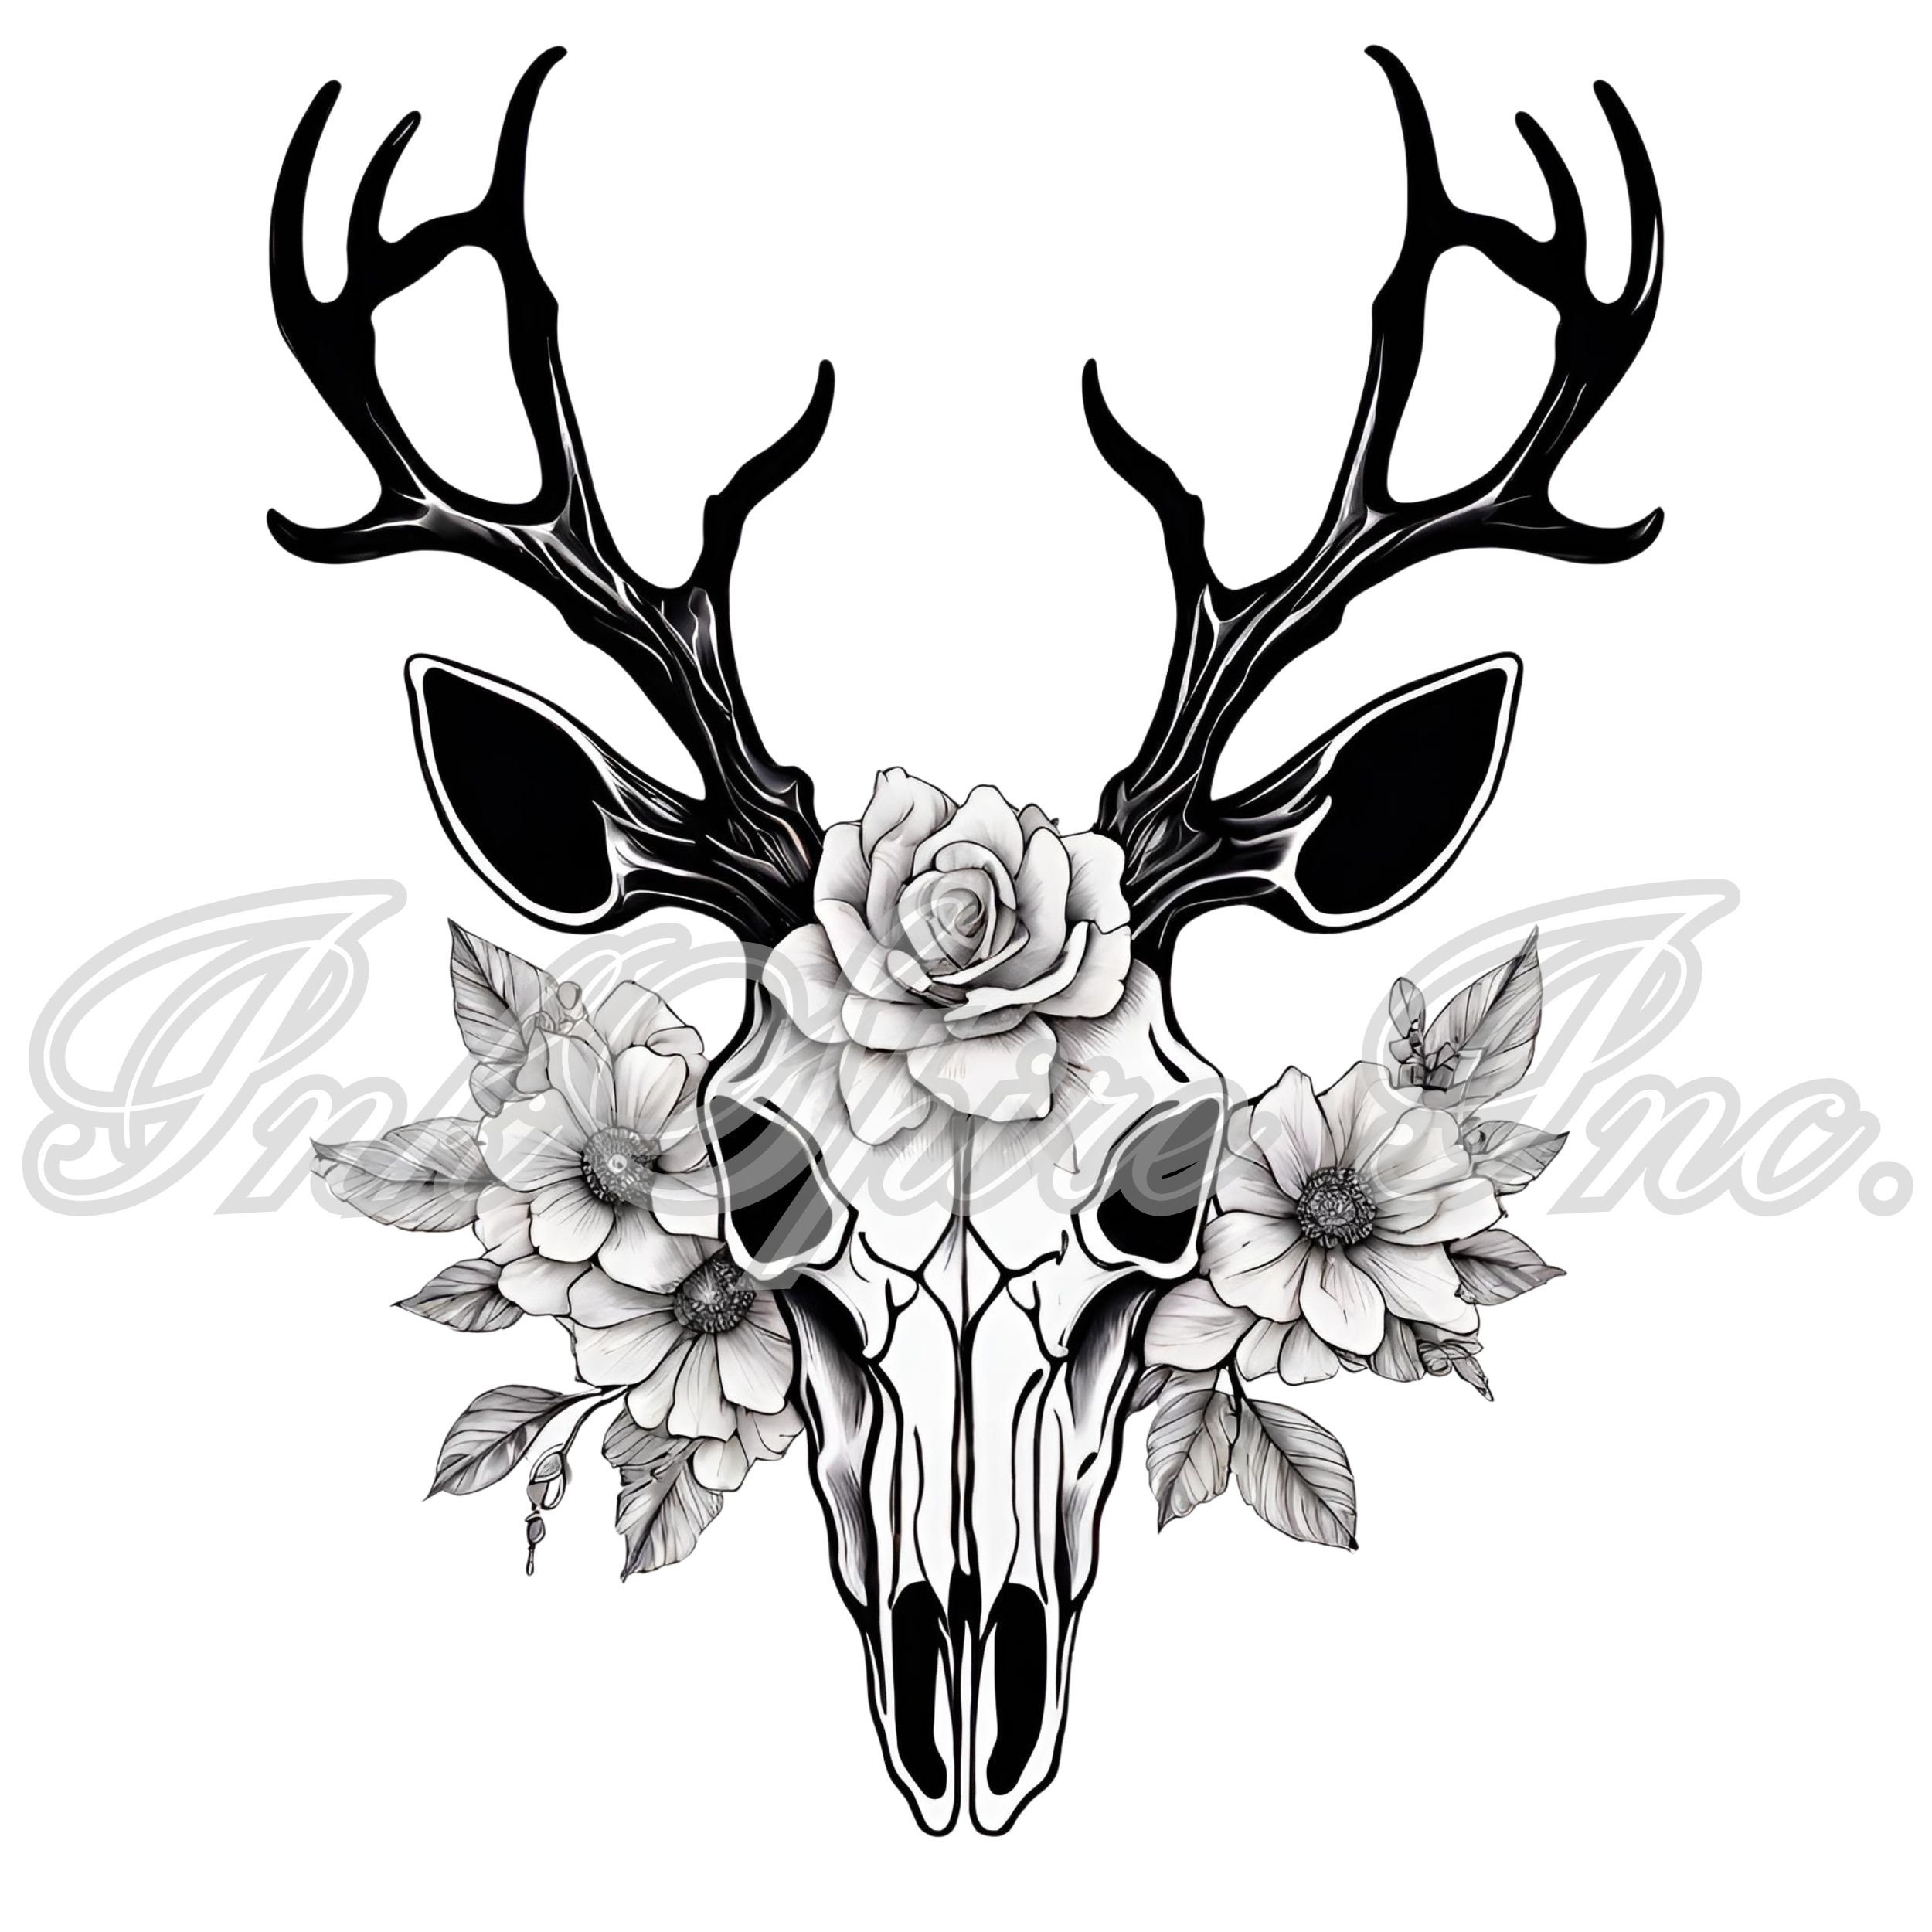 Scars & Stories Tattoo - Here's a Deer Skull/Forest Scene mash-up I had the  chance to make today for my client based off his idea as part of an  eventual full forearm